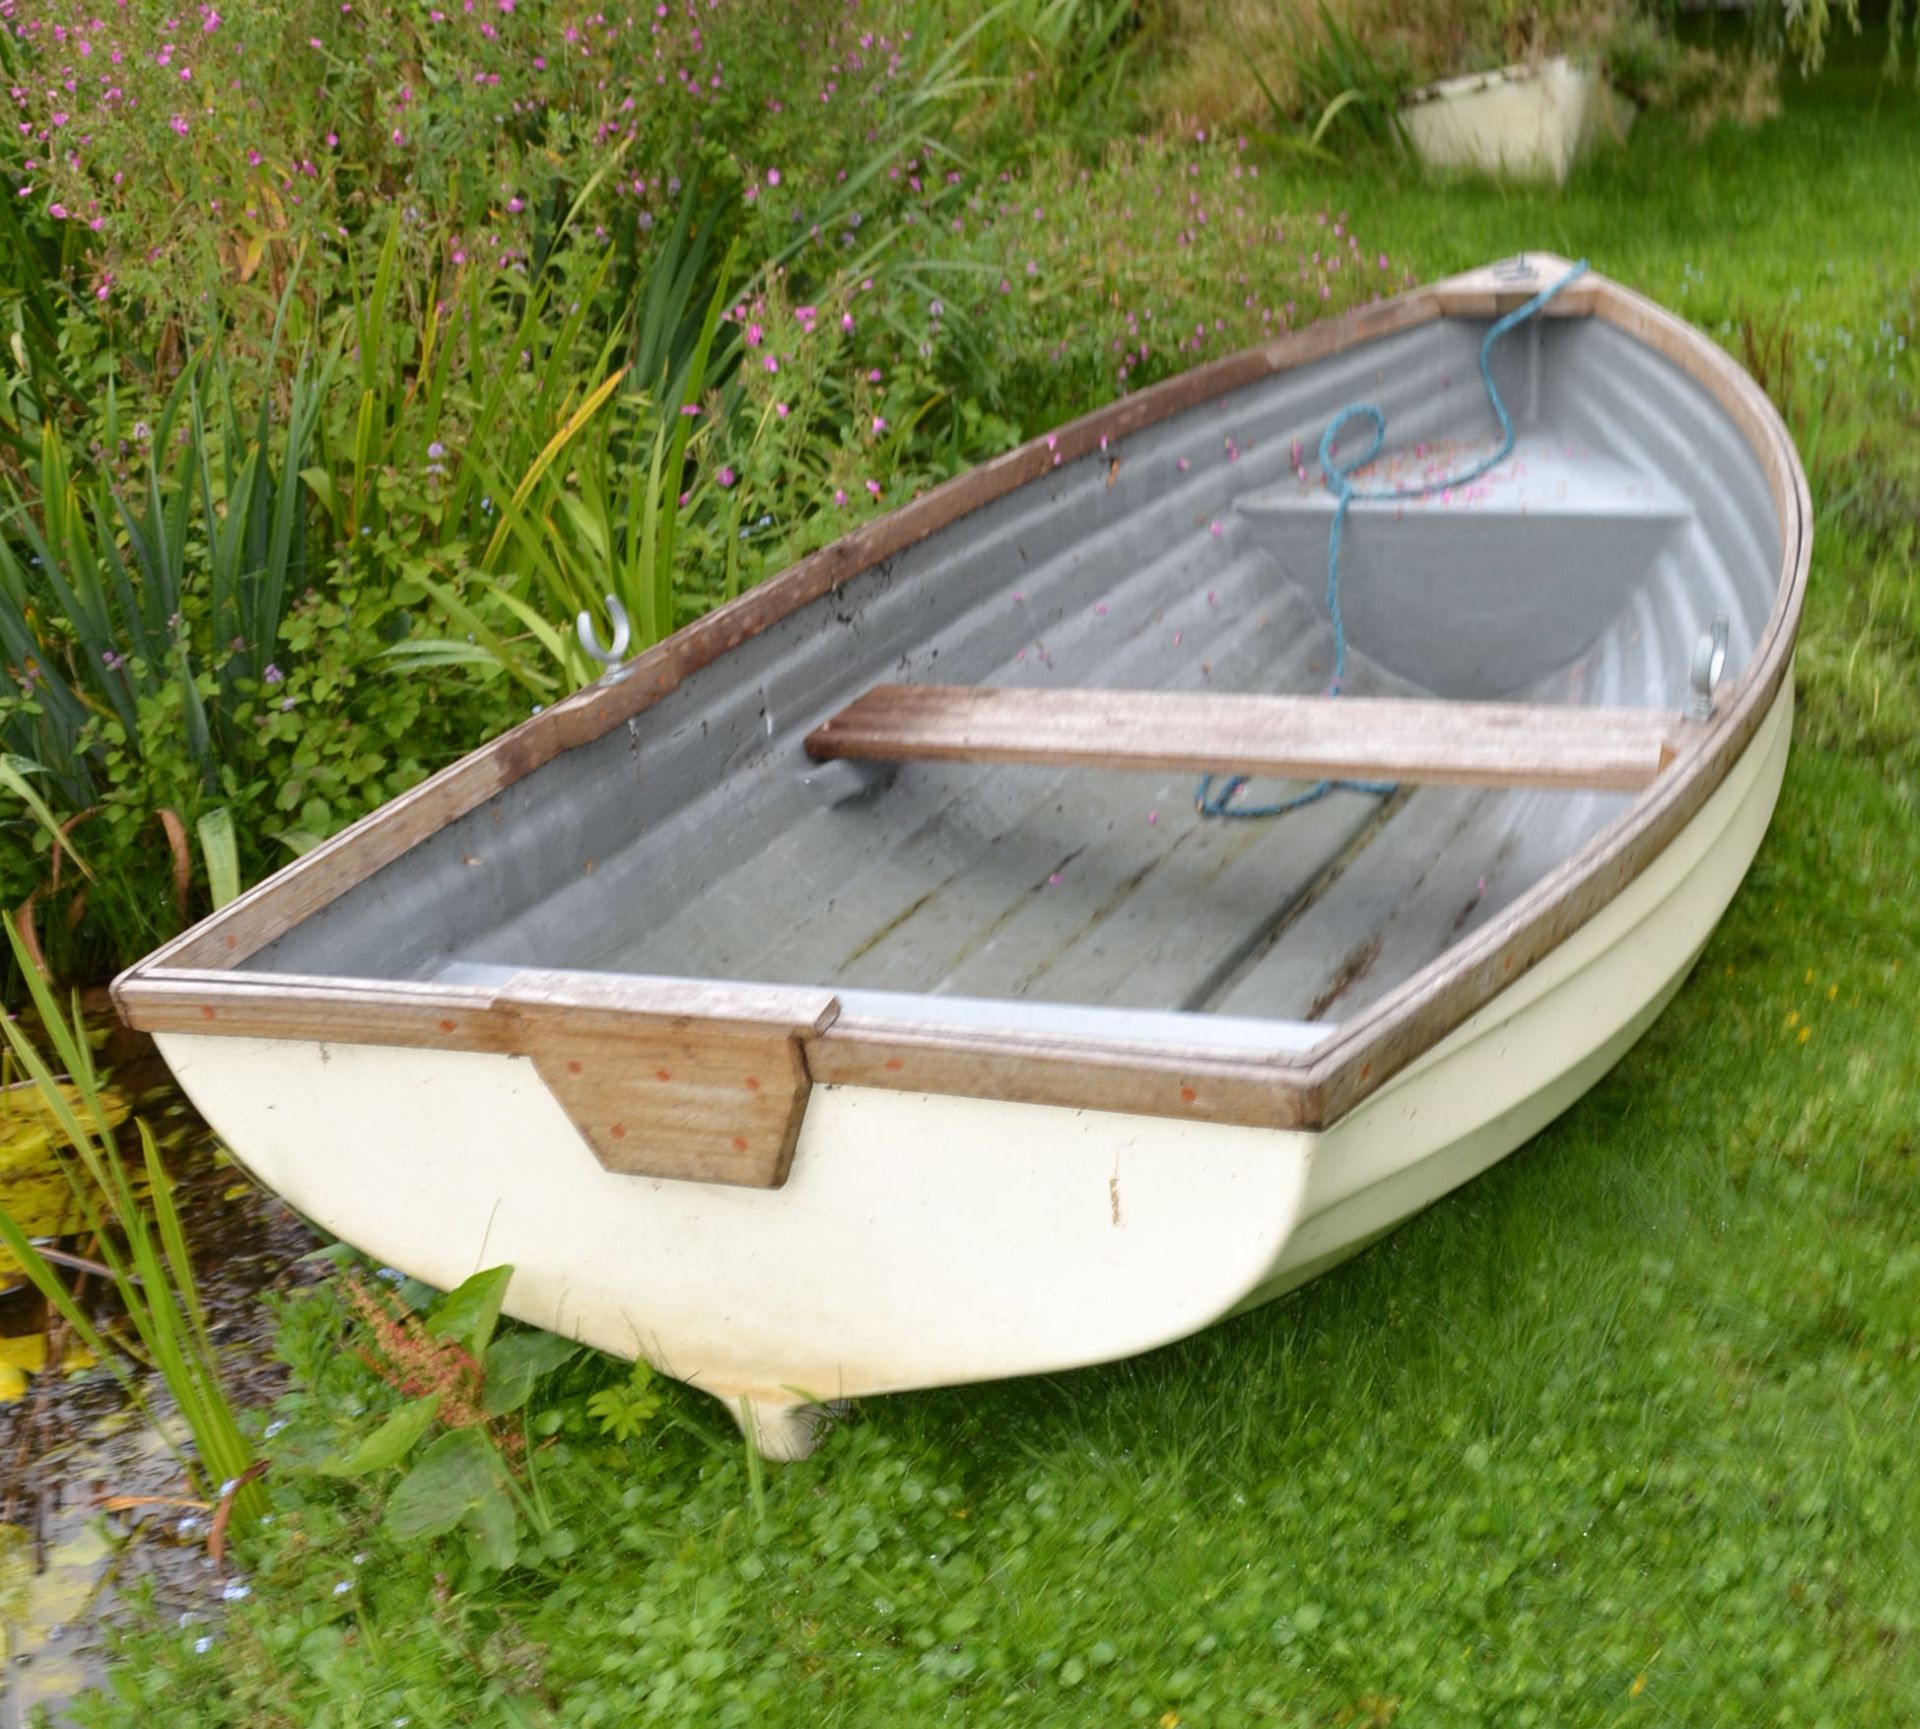 1 x Clovelly 290 Glass Fibre Rowing Boat - 240Kg Maximum Load - CL226 - Location: Knutsford WA16 - Image 8 of 15